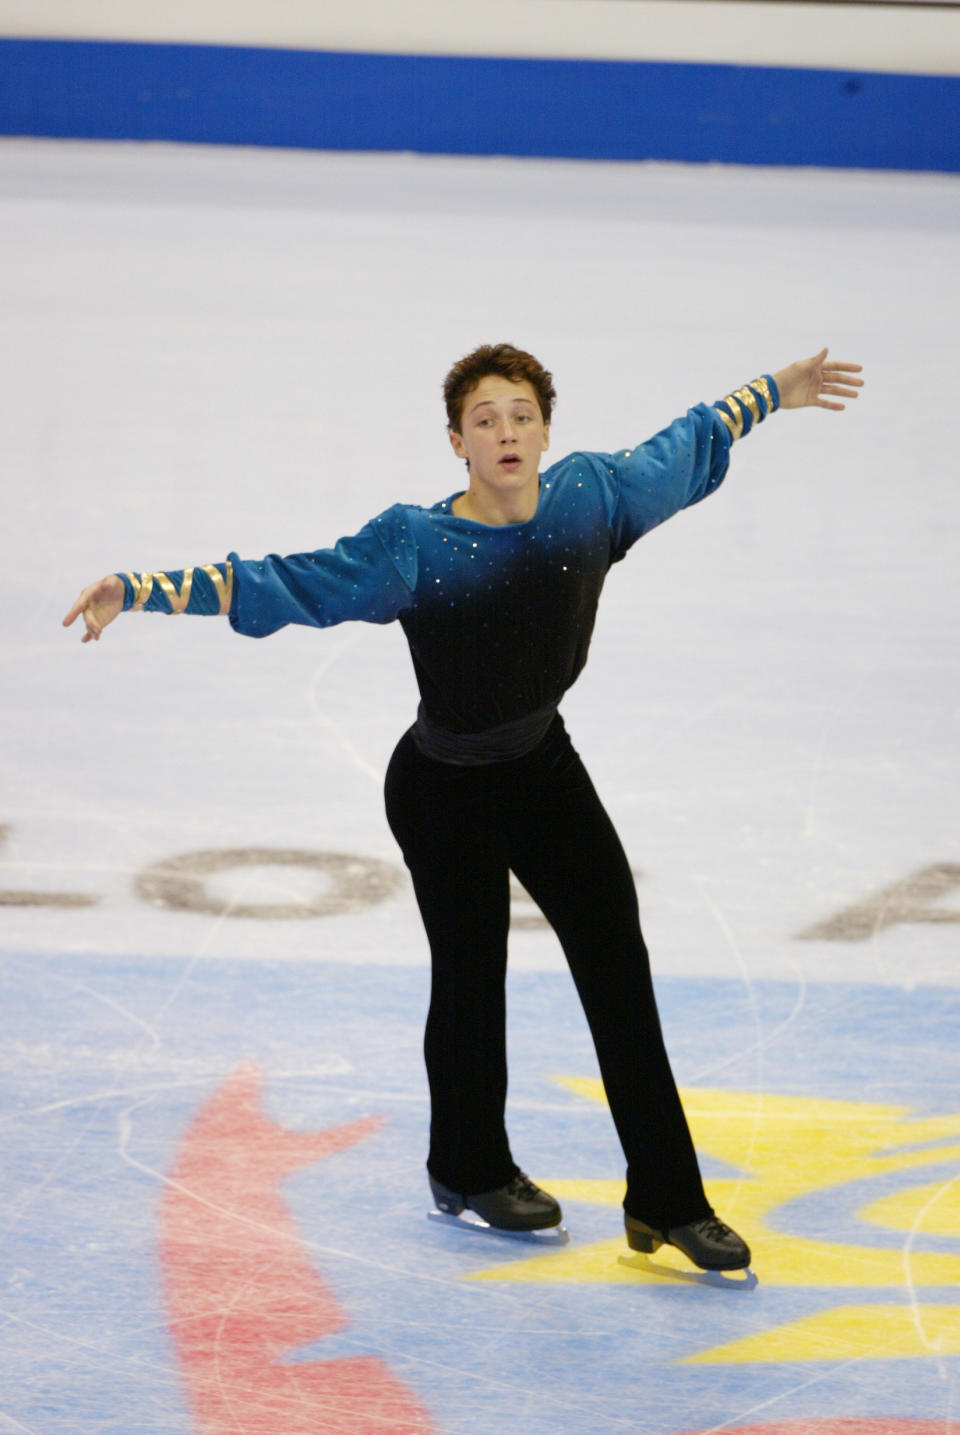 Competing in the men's free program during the State Farm U.S. Figure Skating Championships at the Staples Center in Los Angeles&nbsp;on Jan. 10, 2002.